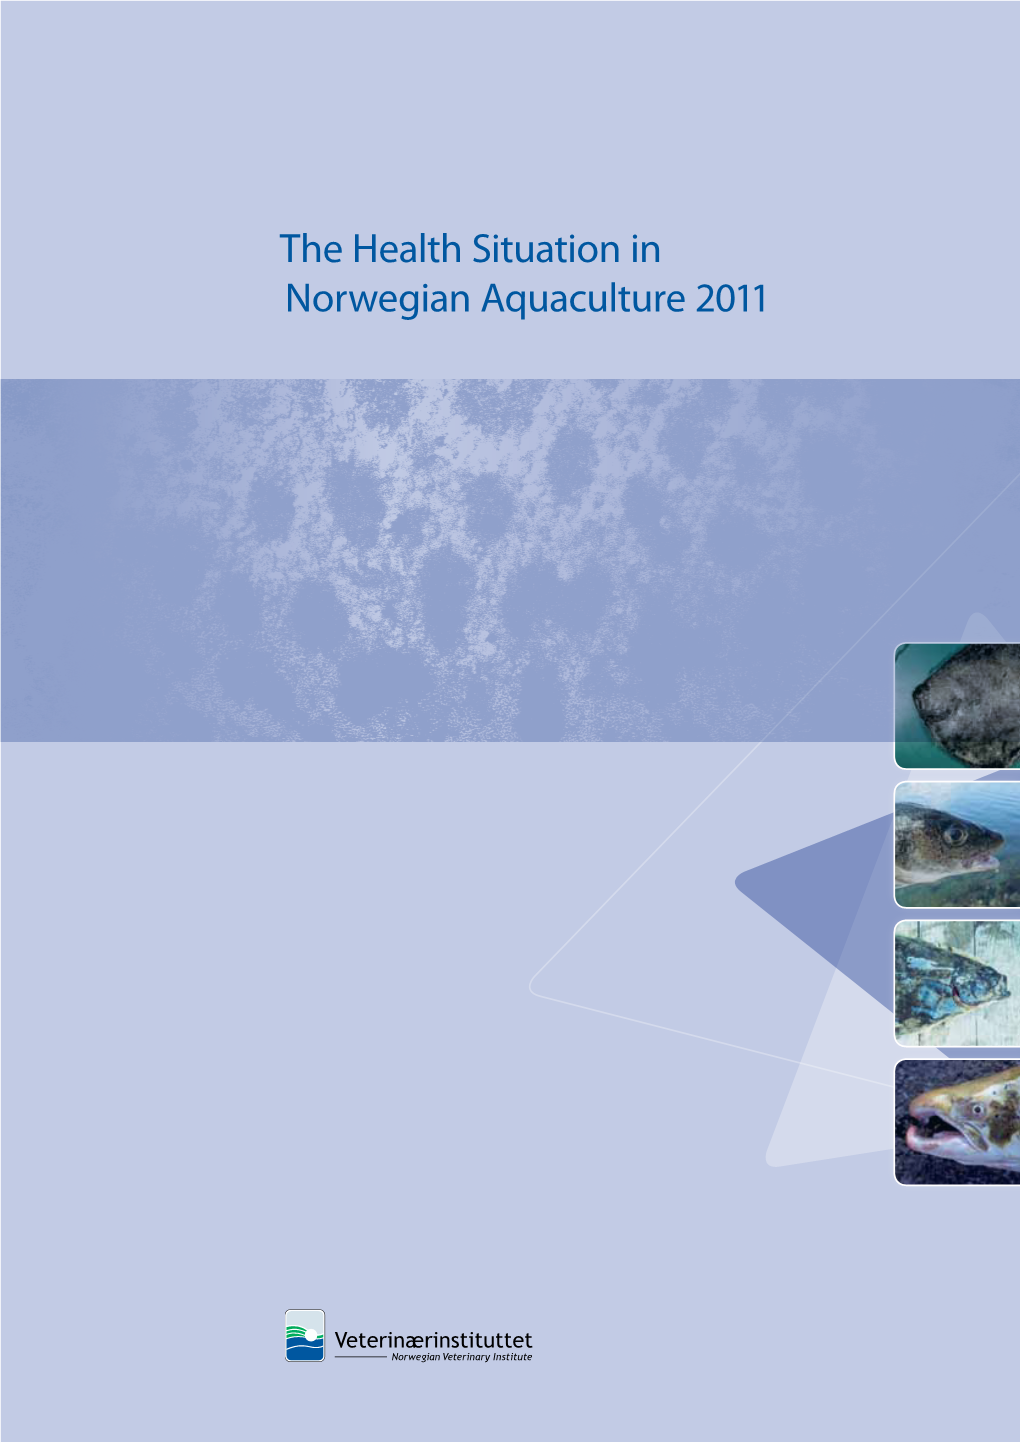 The Health Situation in Norwegian Aquaculture 2011